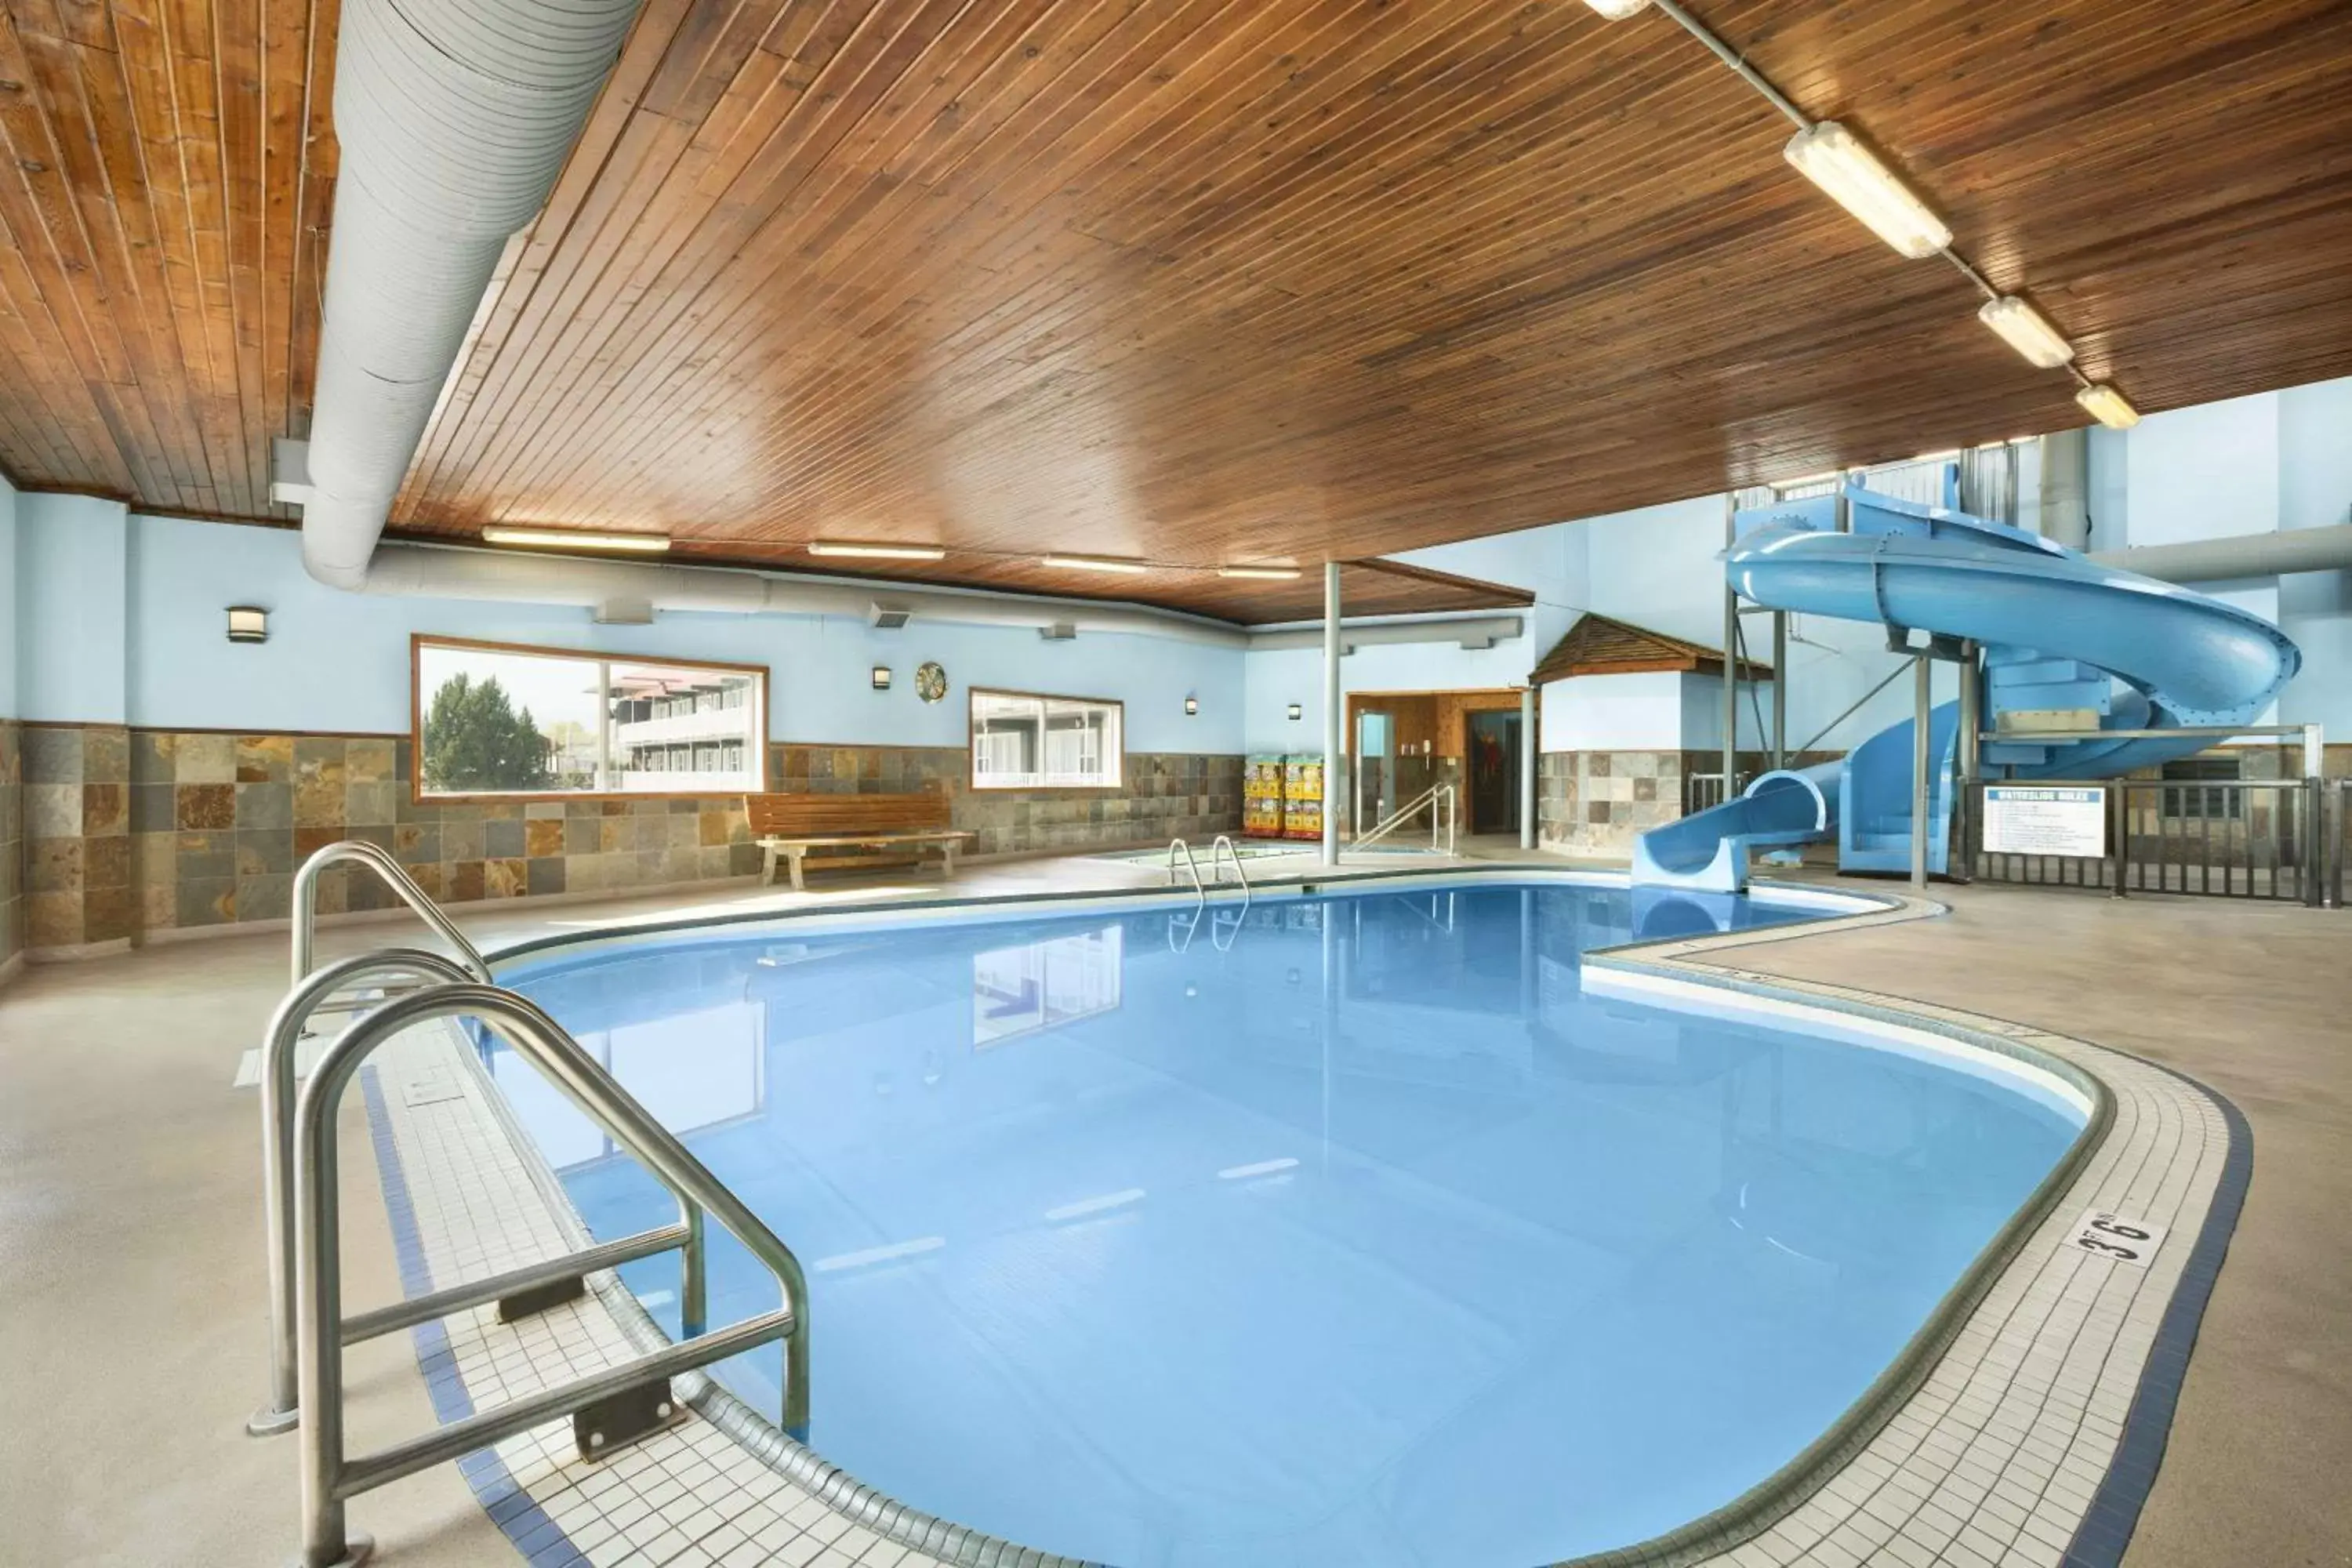 On site, Swimming Pool in Days Inn by Wyndham Golden